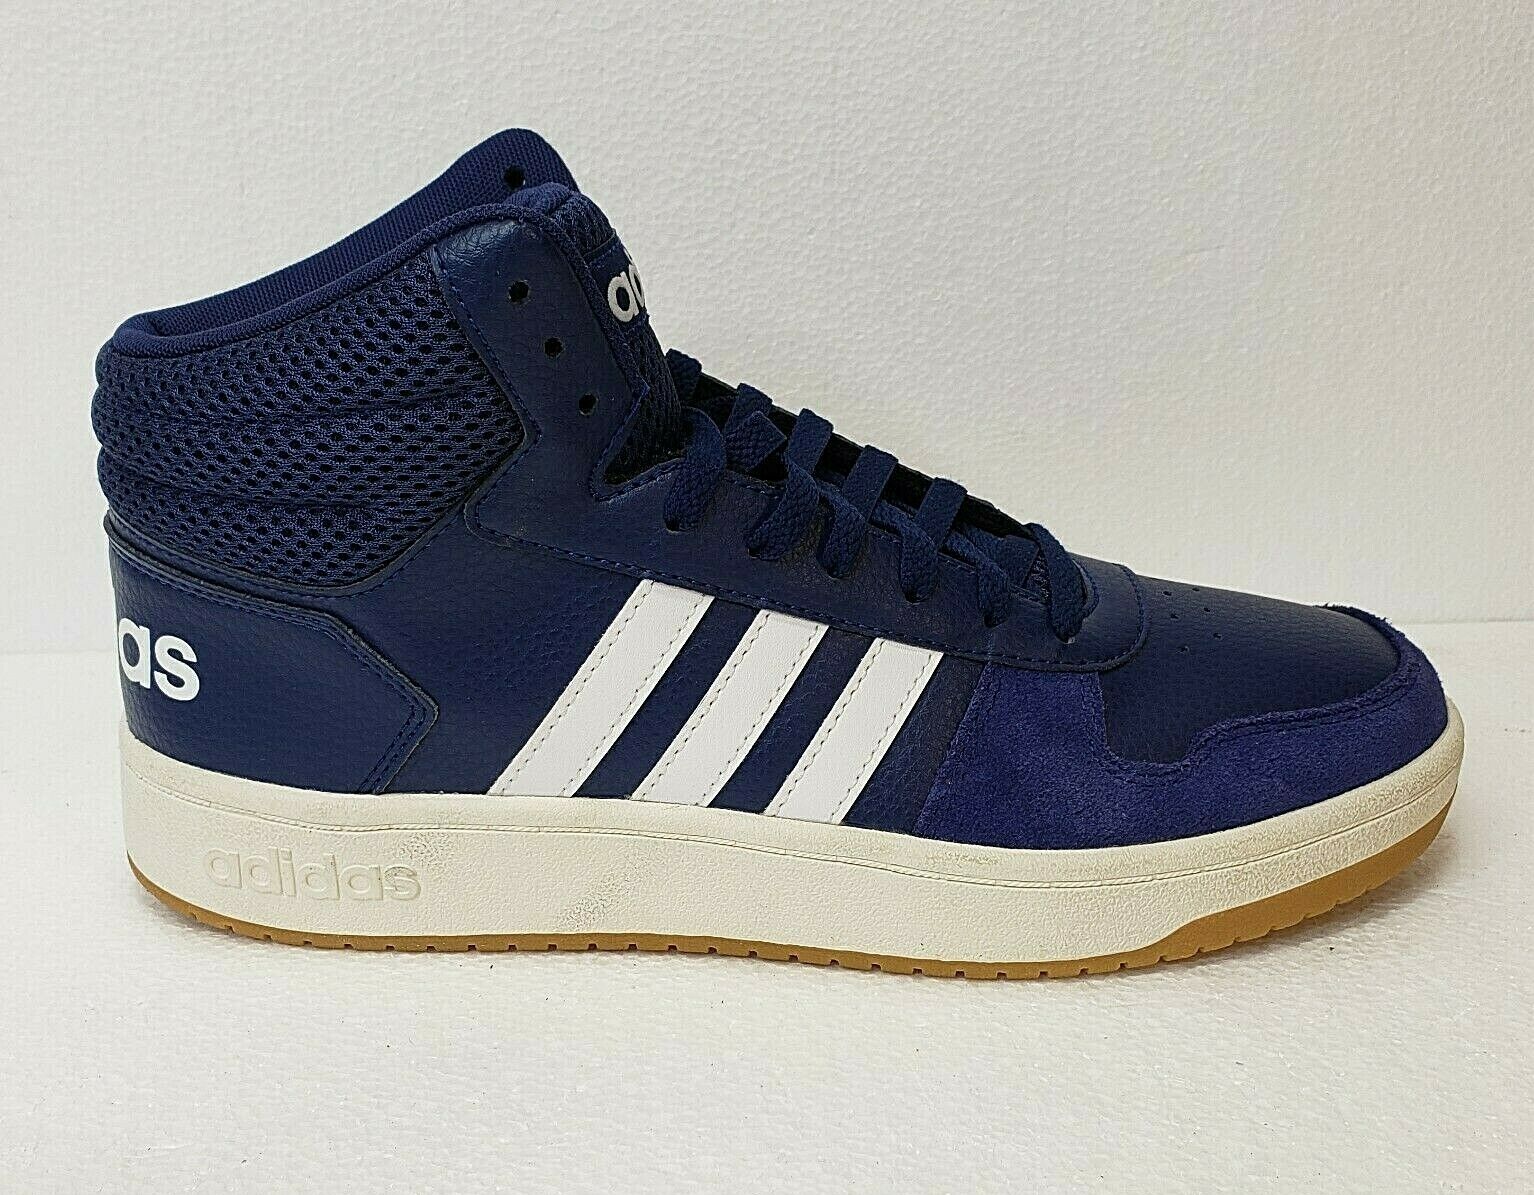 Adidas Blue White Hoops 2.0 Size 8.5 Mid High Top Athletic Shoes Sneakers